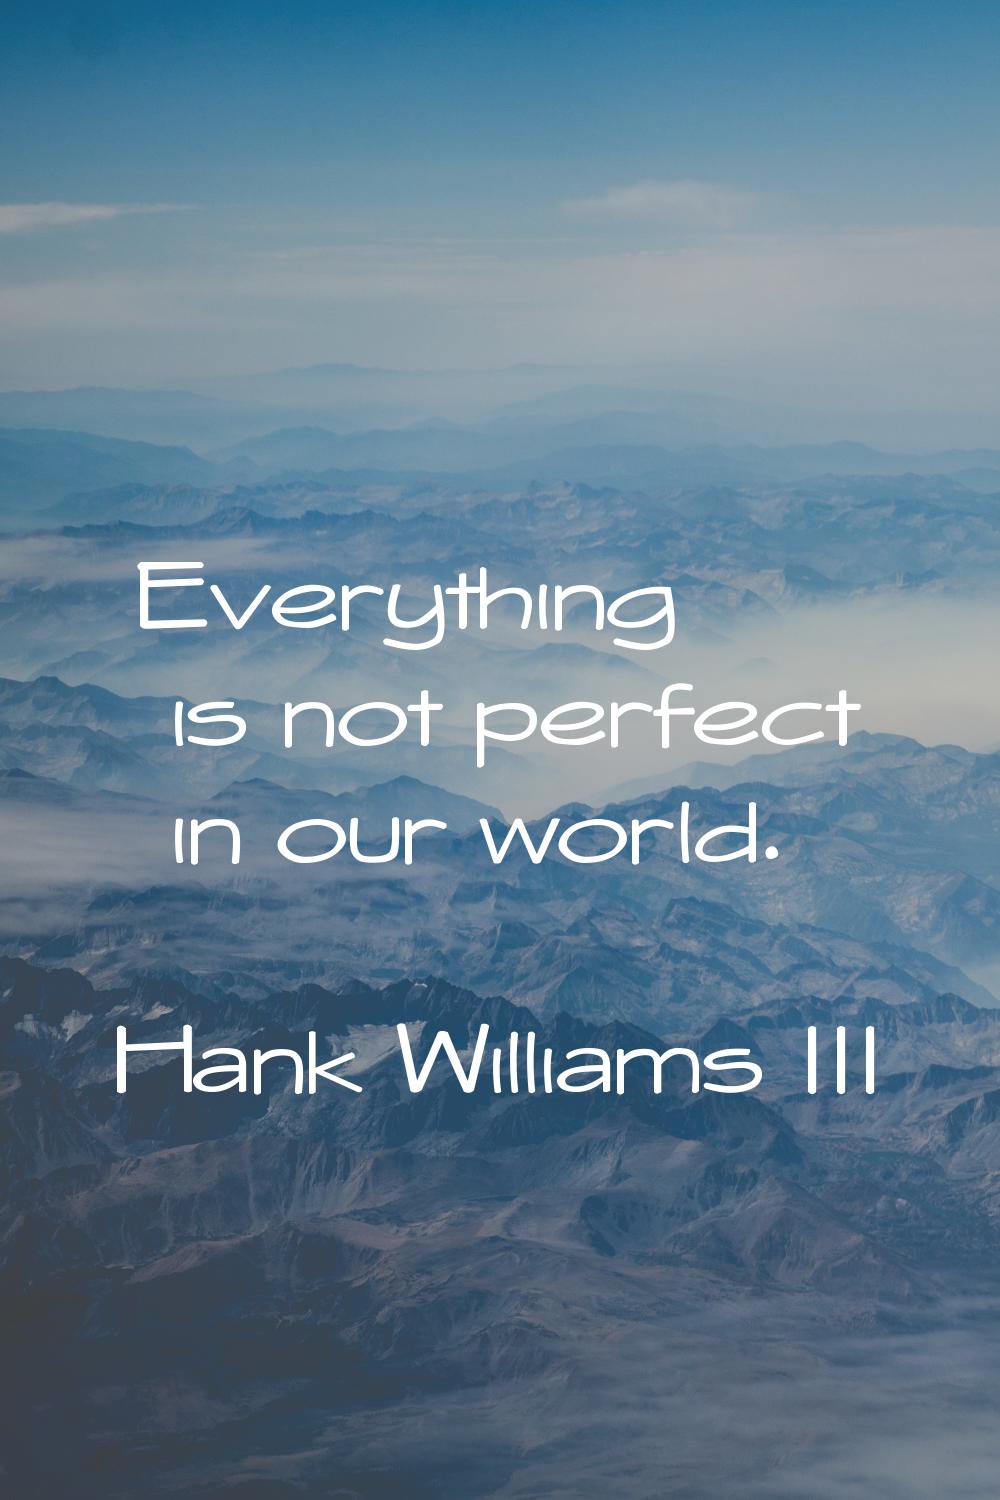 Everything is not perfect in our world.